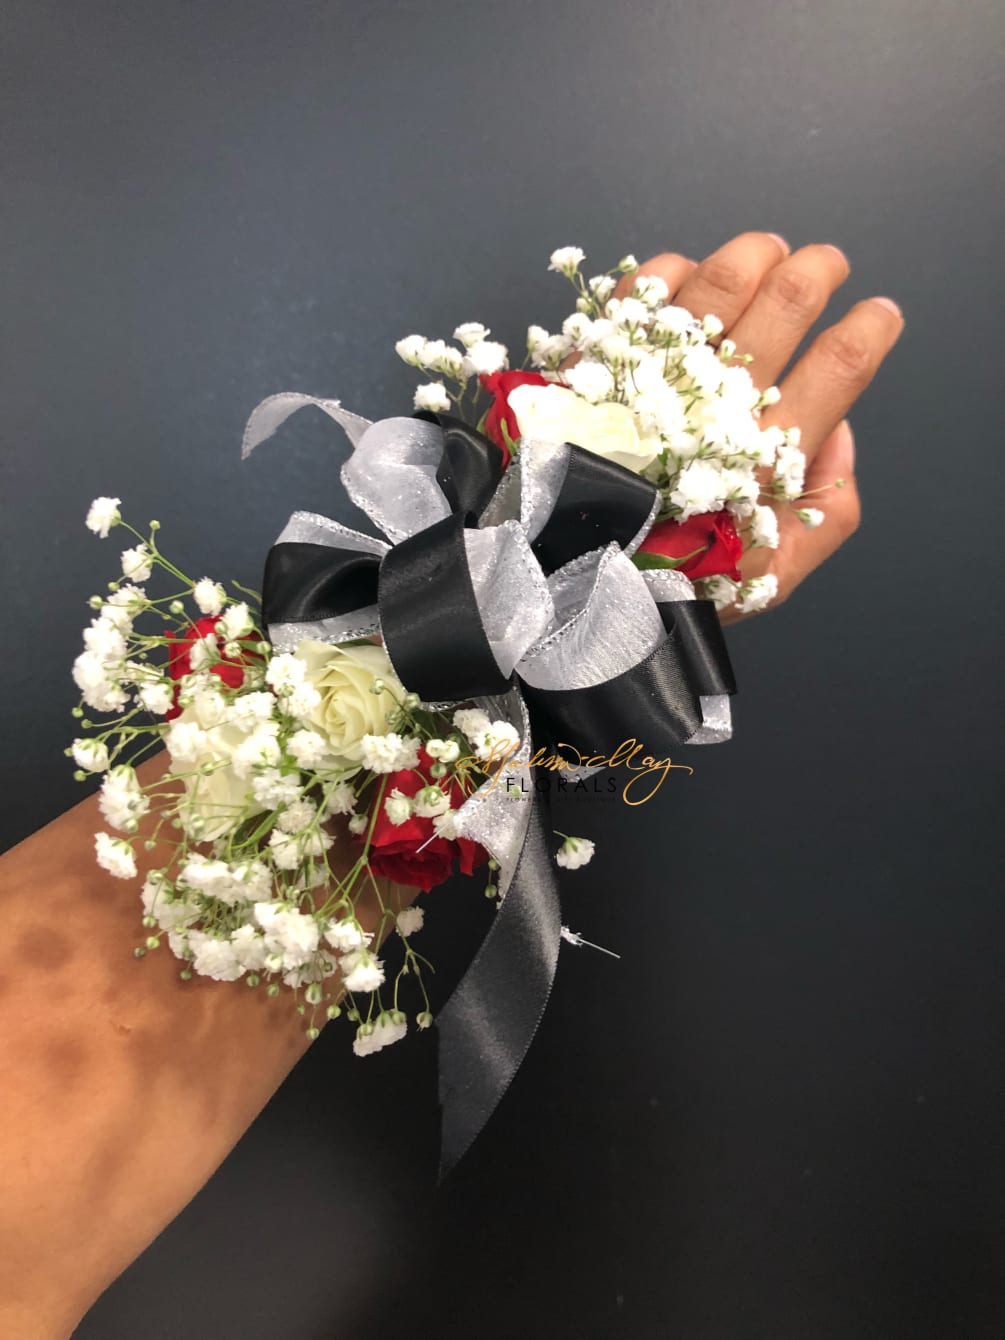 The perfect corsage for a prom date . It has black and